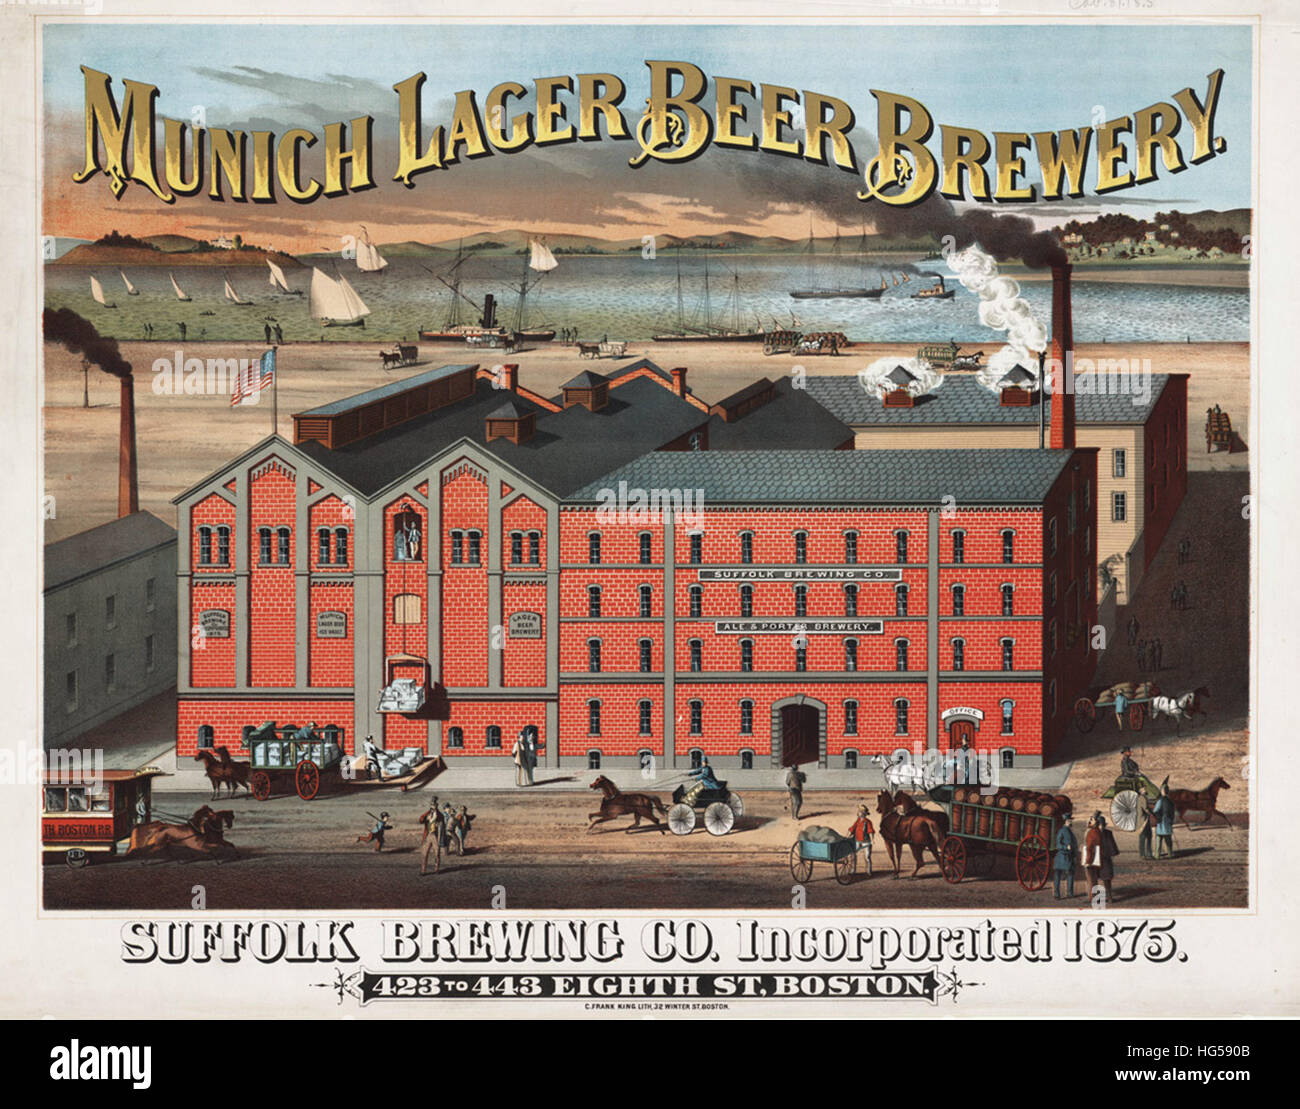 Boston Brewery Affiches - Munich lager beer Brewery. Suffolk Brewing Co., constituée en 1875, 423 à 443 8 St, Boston Banque D'Images